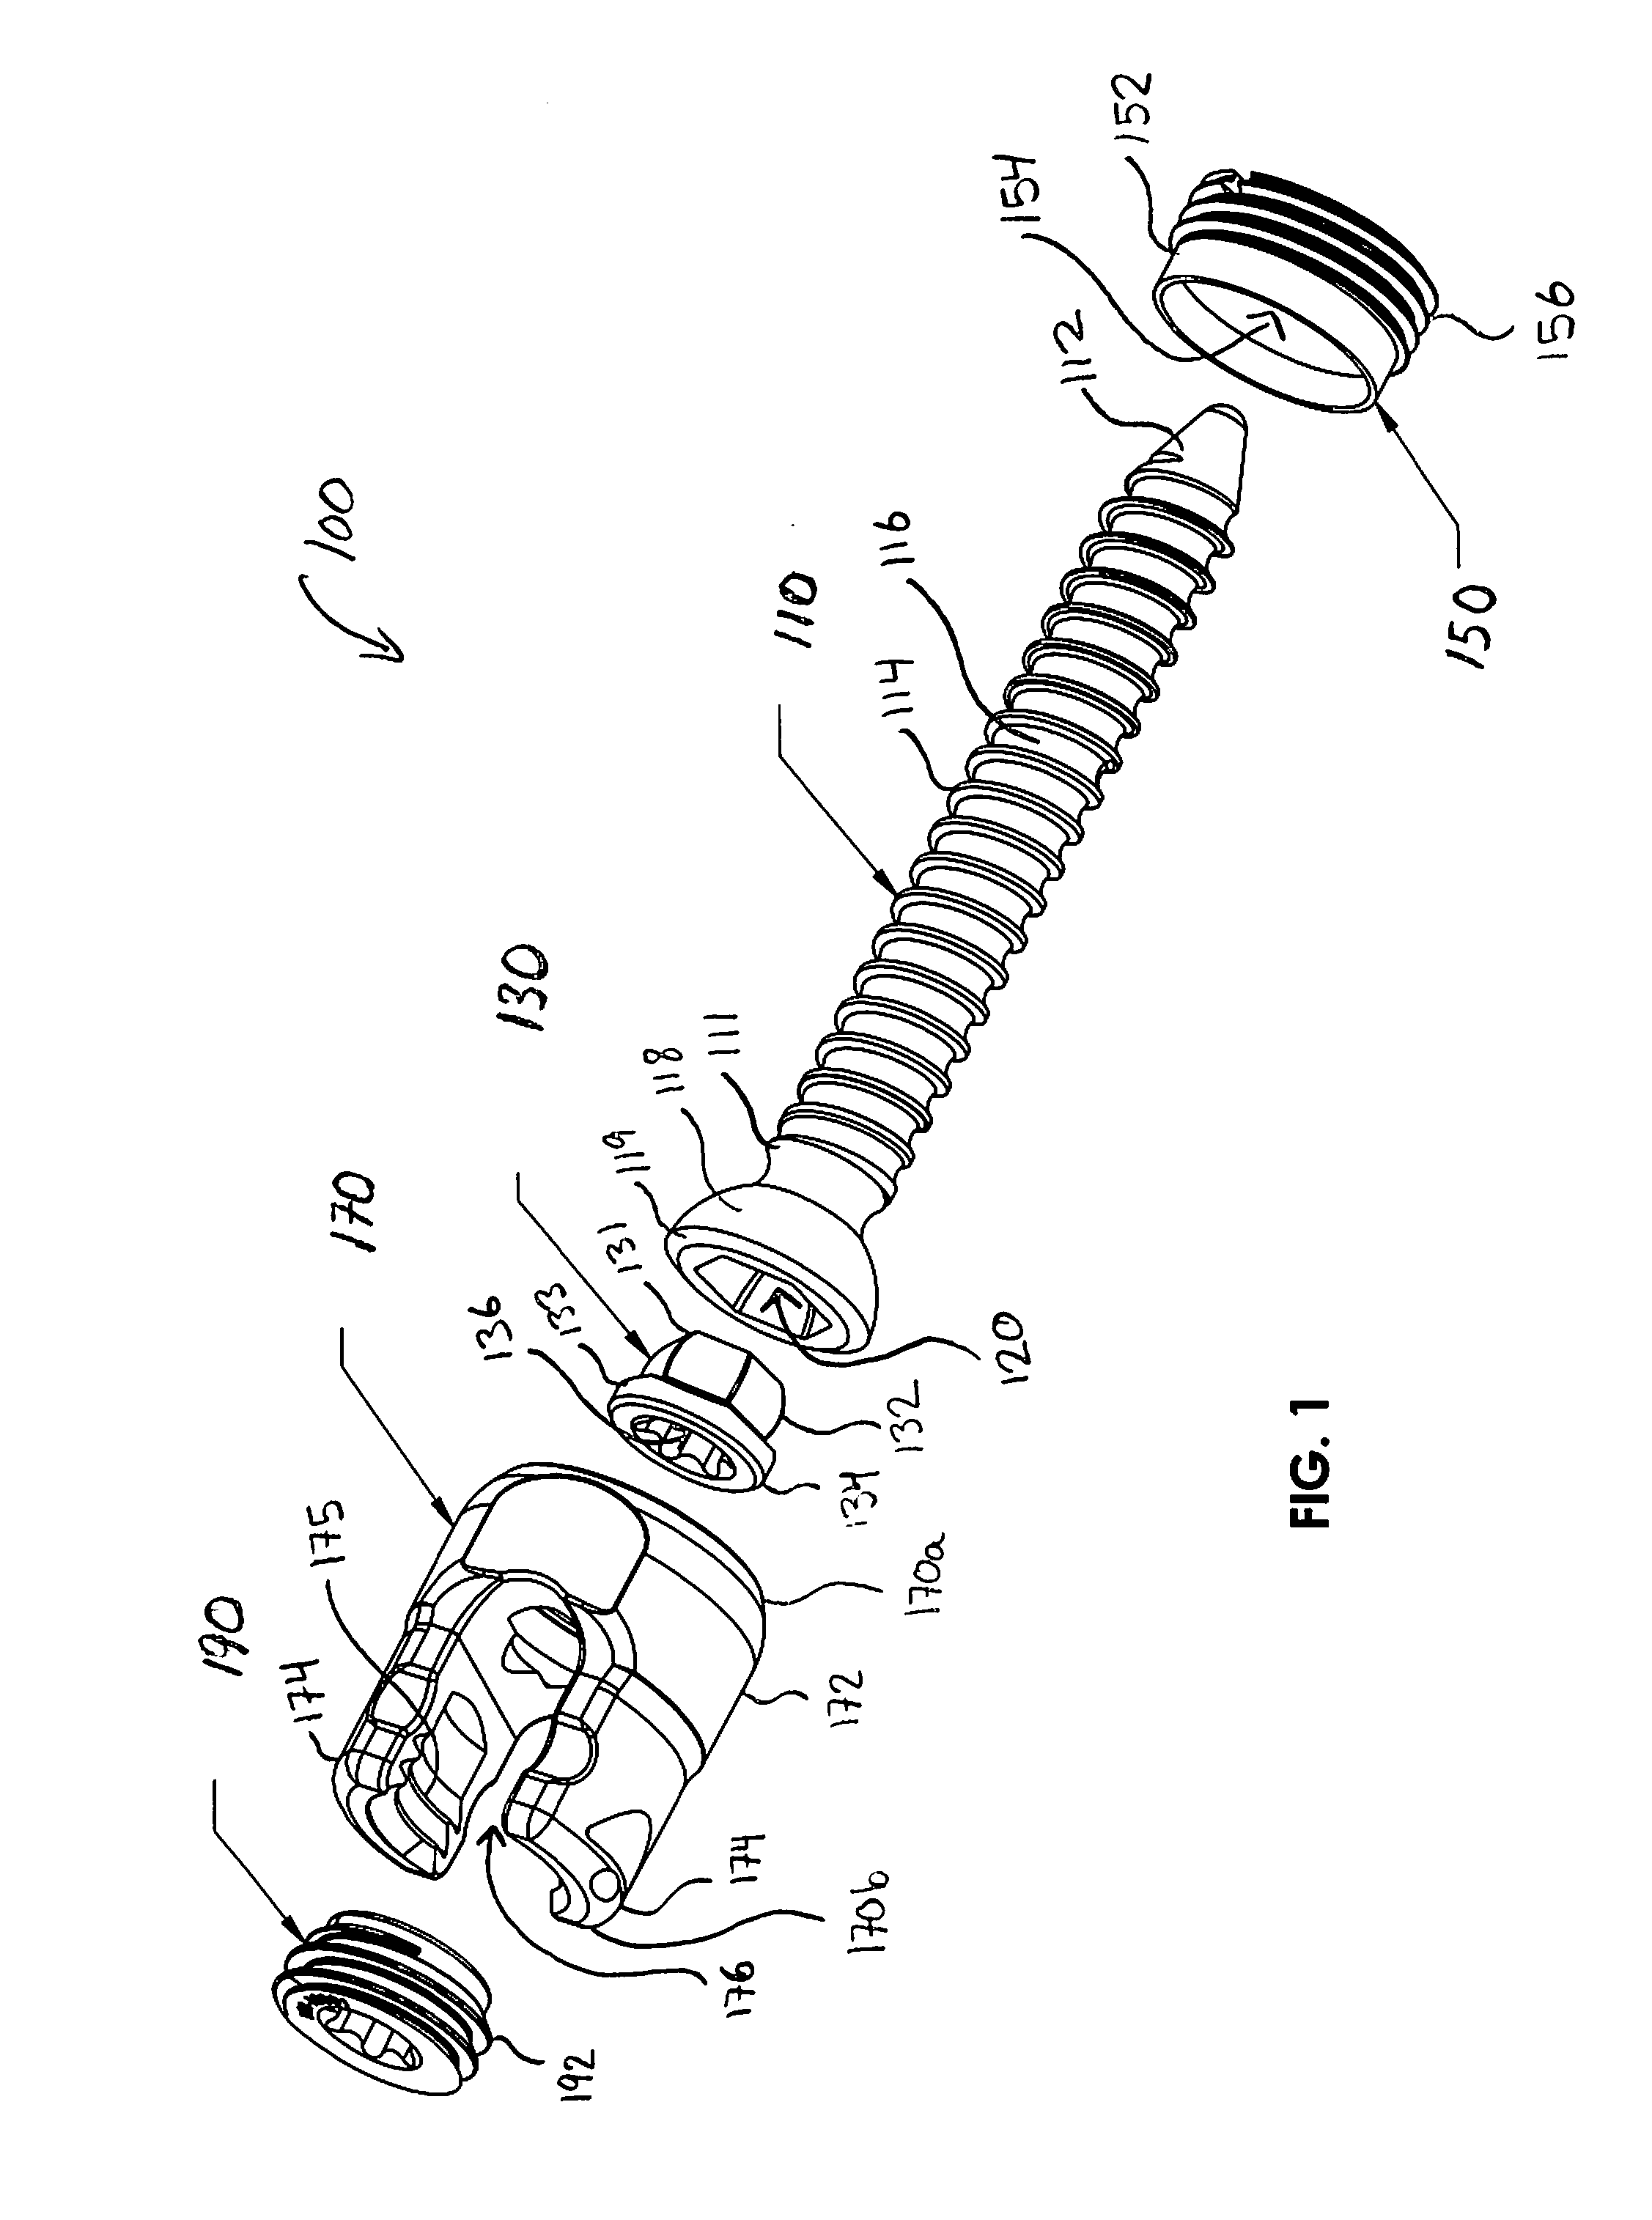 Bone screw assembly with non-uniform material